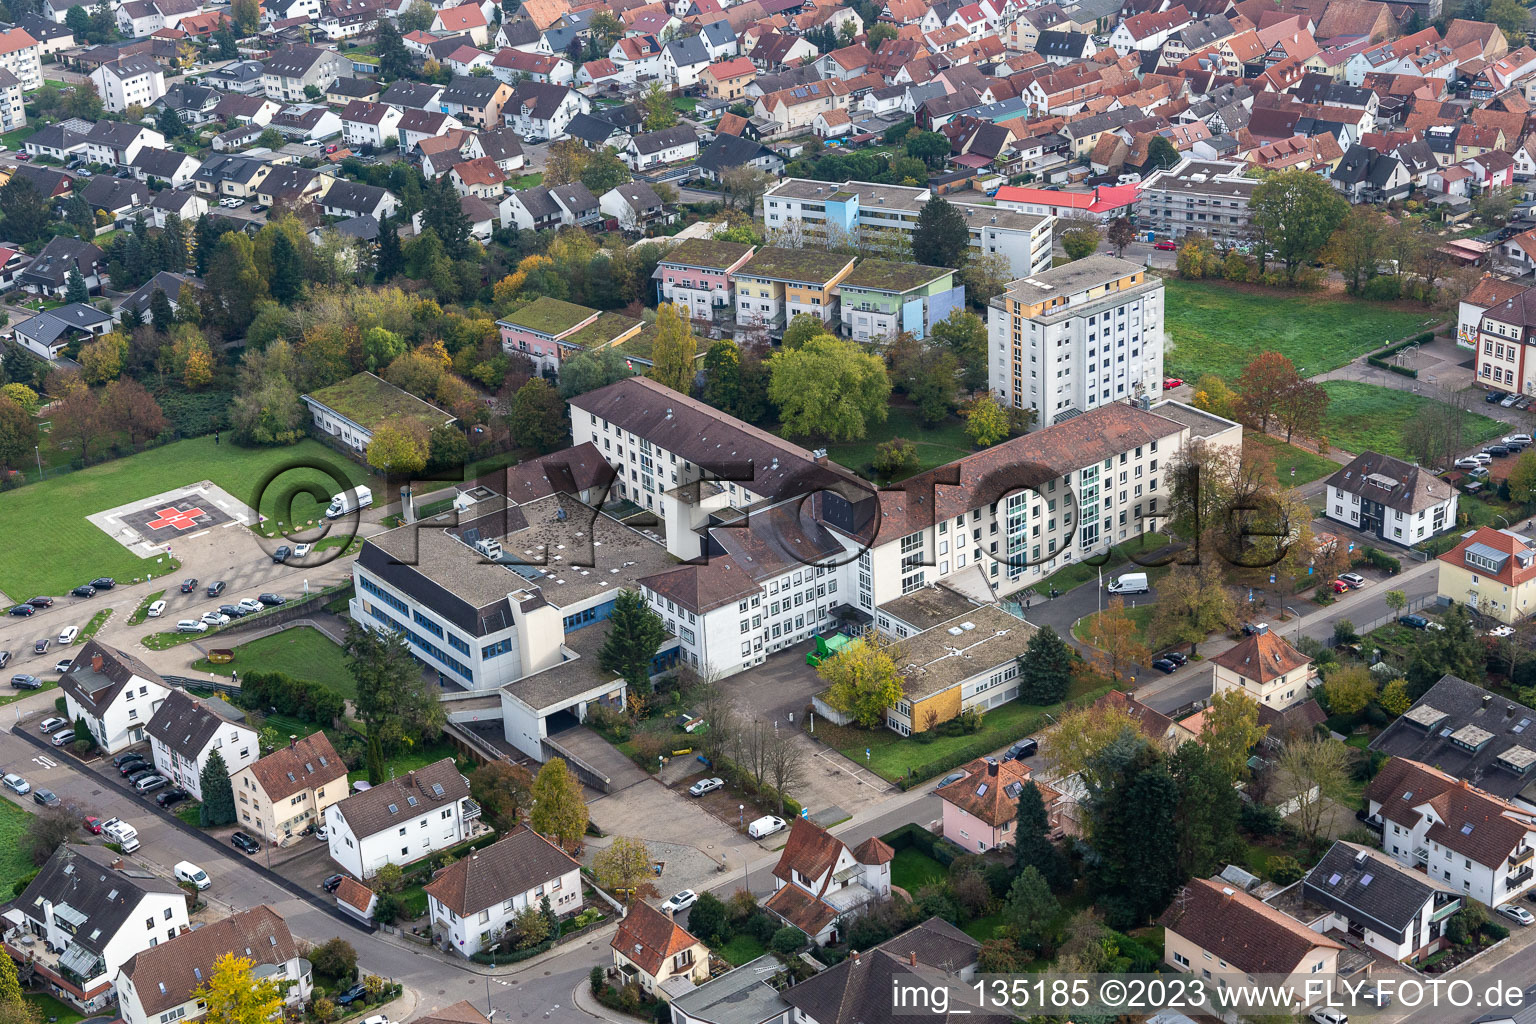 Aerial view of Asclepius Hospital in Kandel in the state Rhineland-Palatinate, Germany